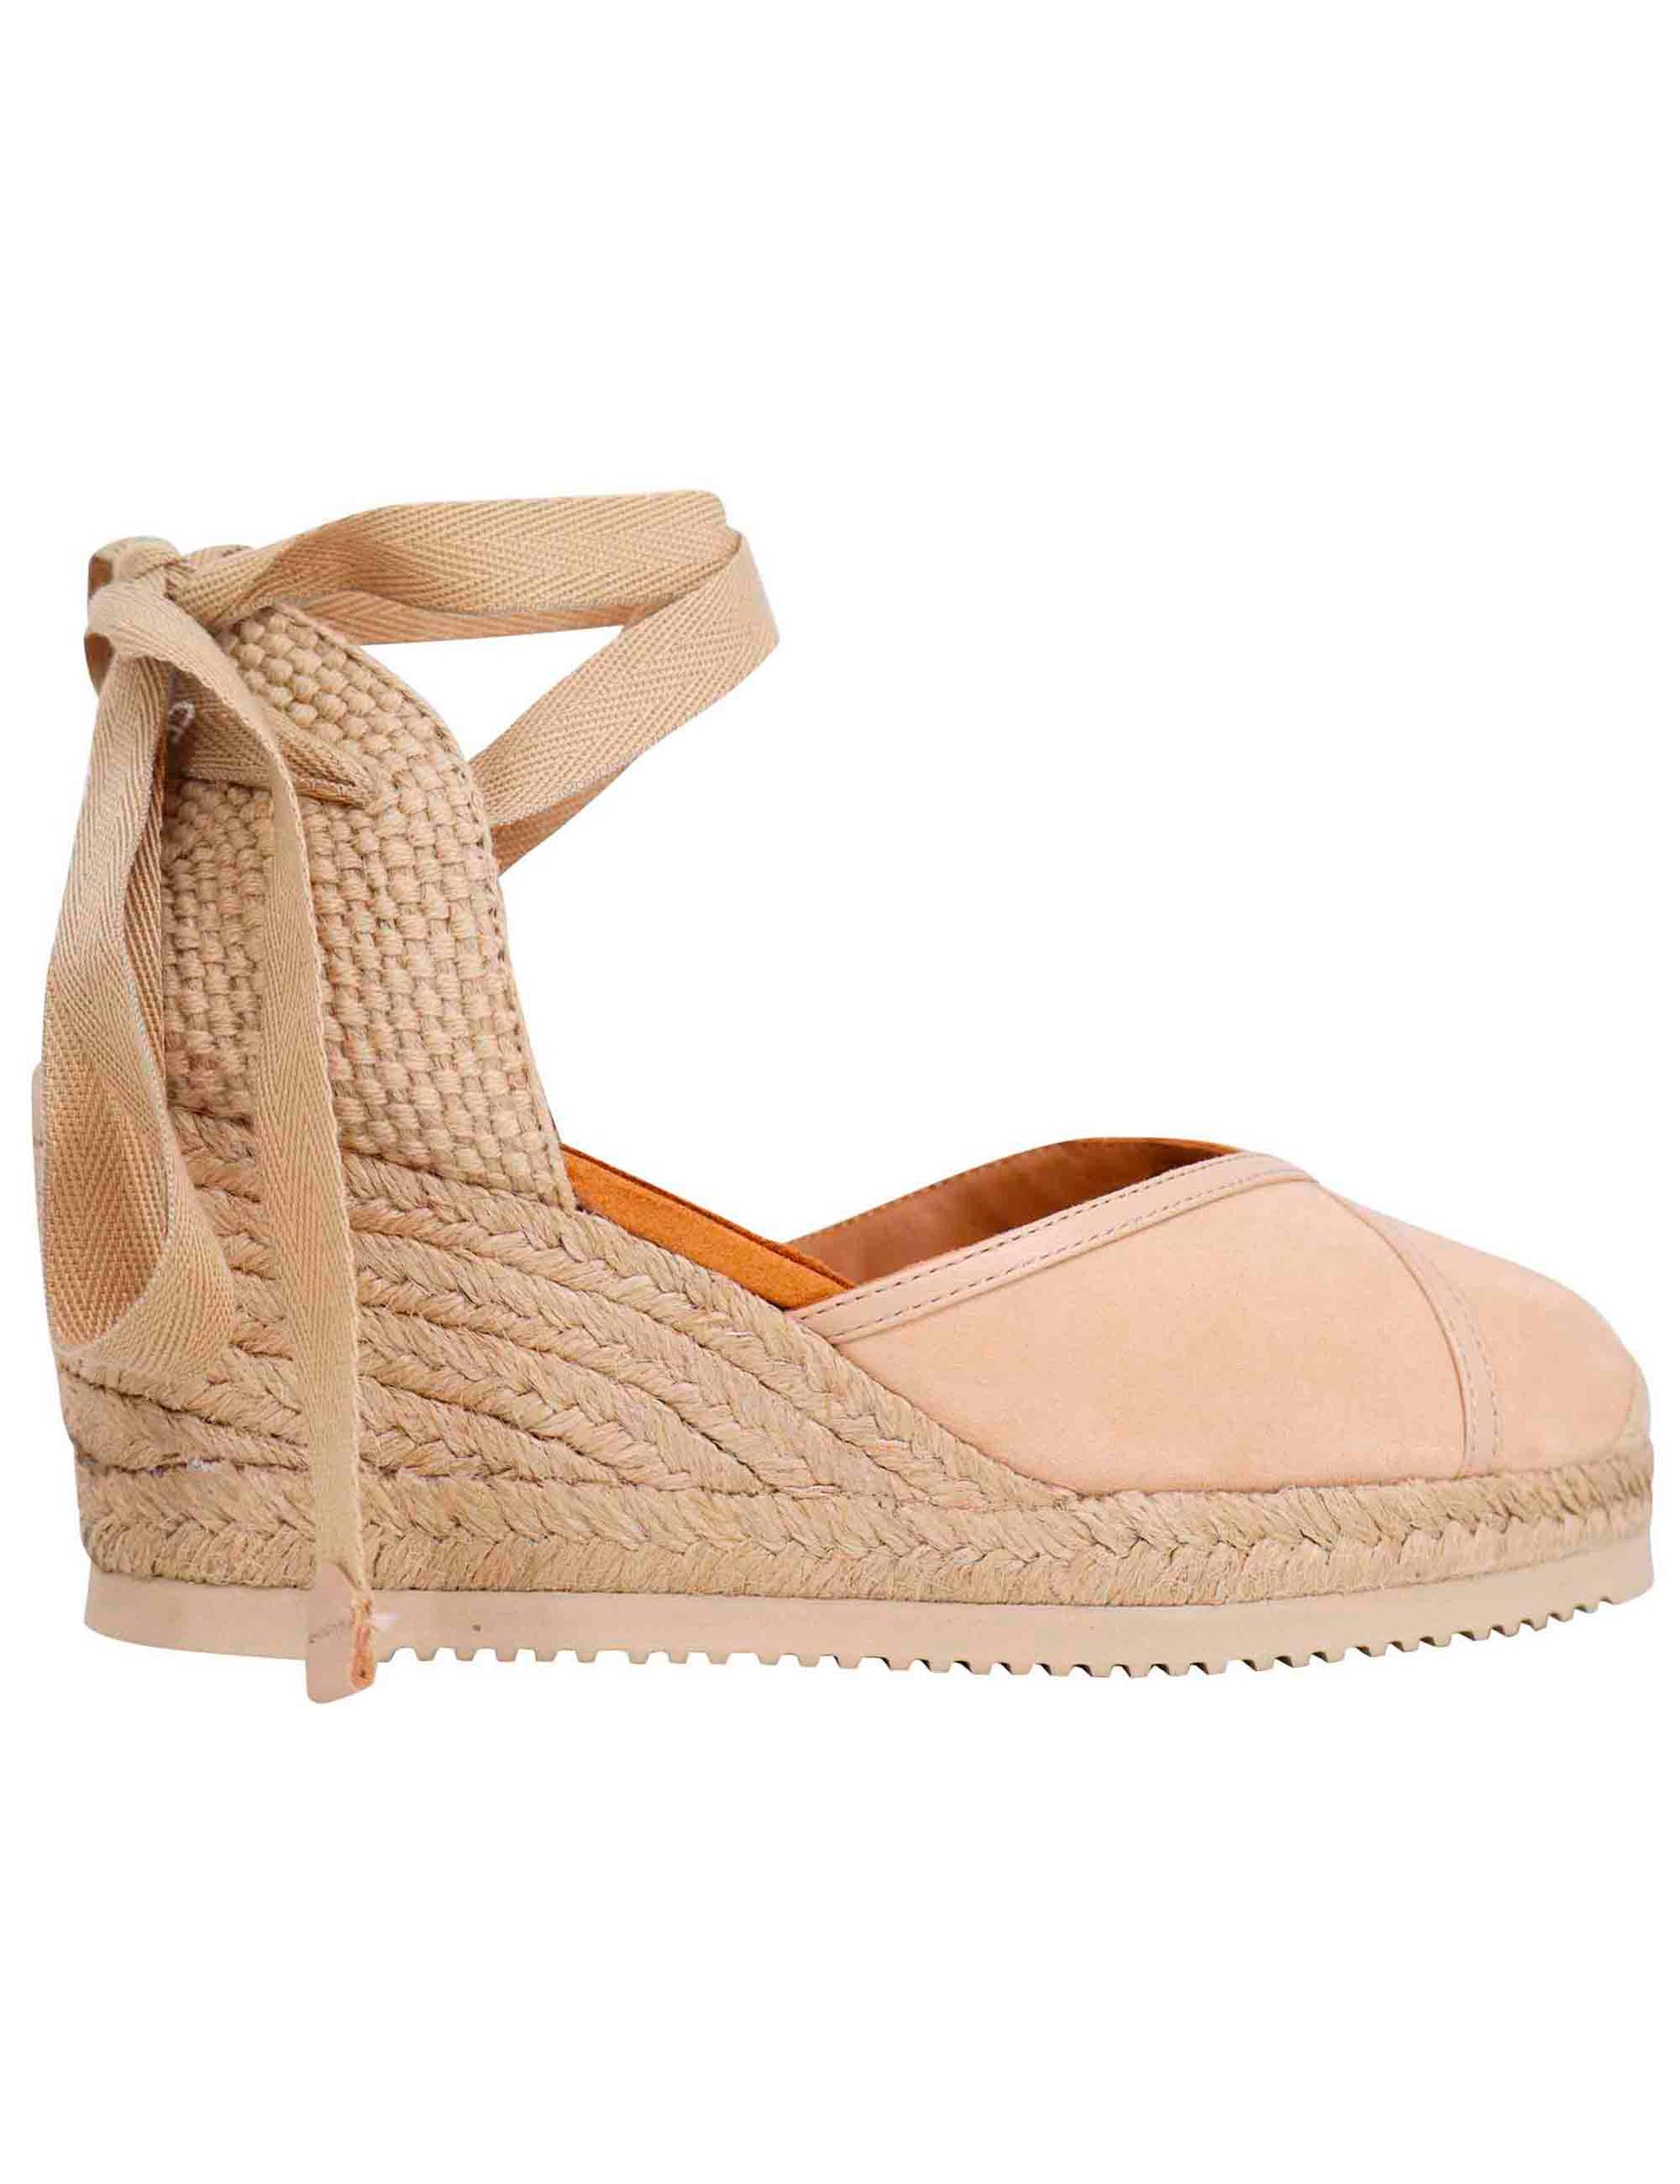 Women's espadrilles sandals in nude suede with rope wedge